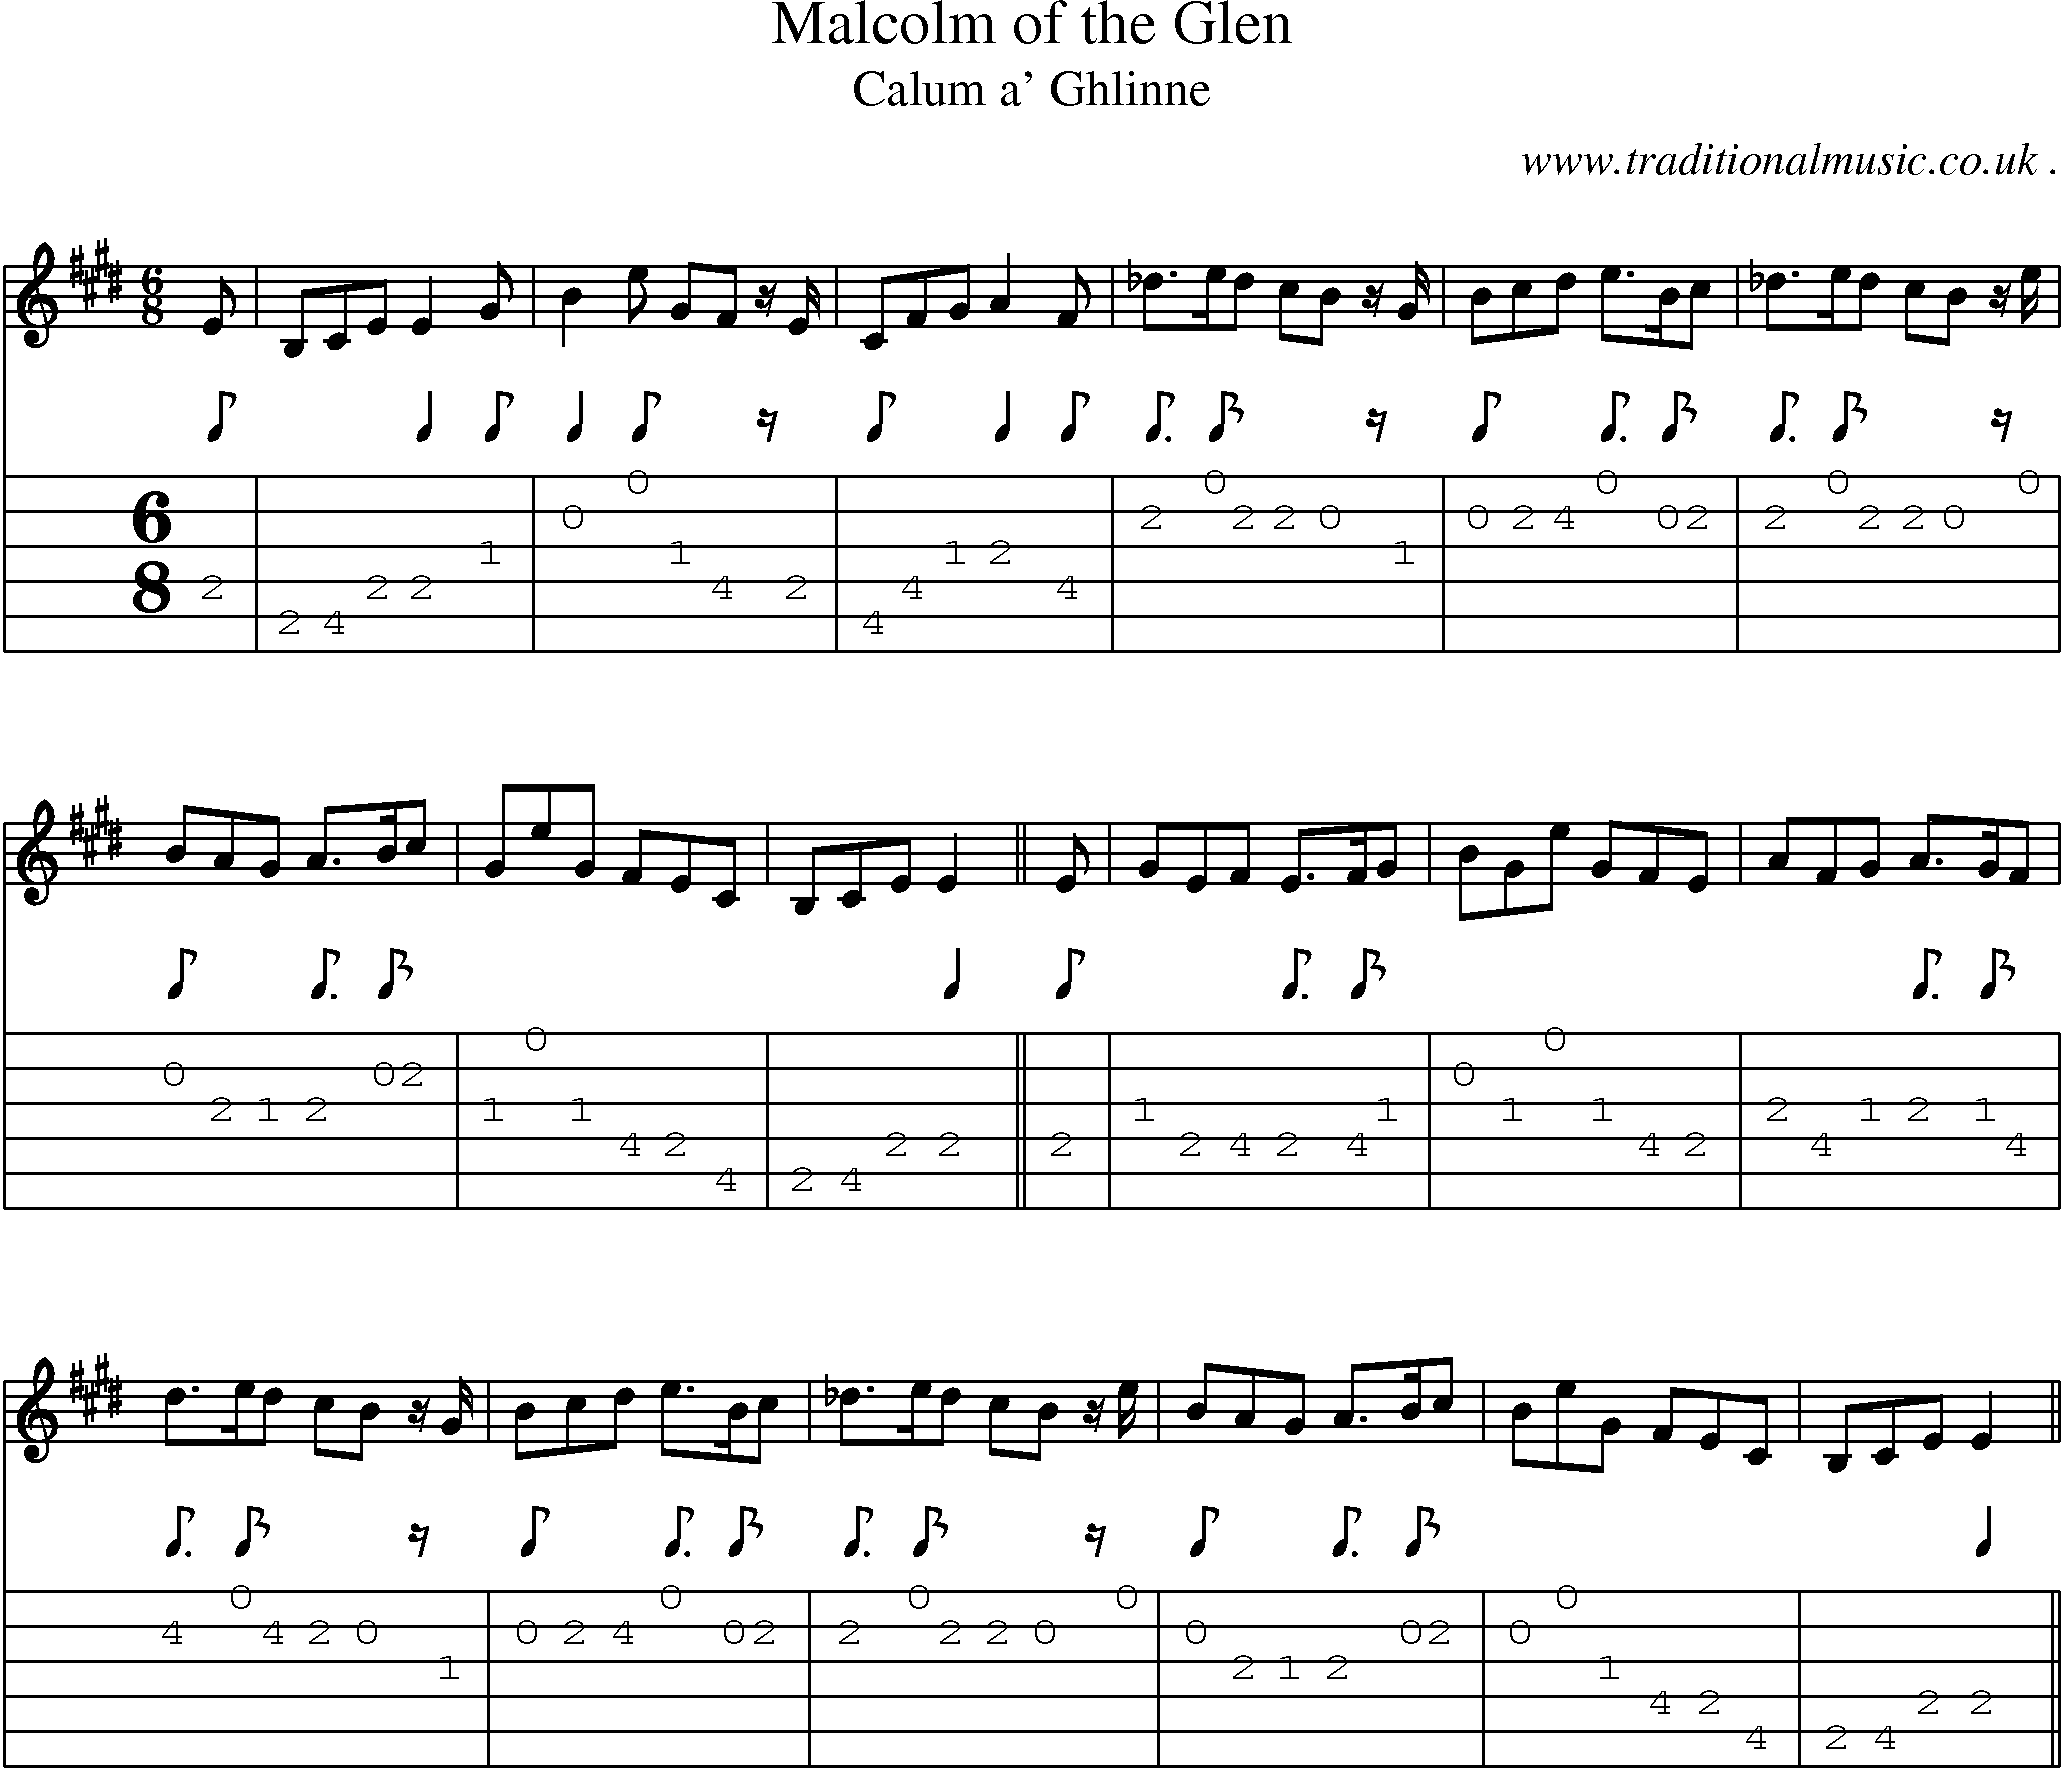 Sheet-music  score, Chords and Guitar Tabs for Malcolm Of The Glen